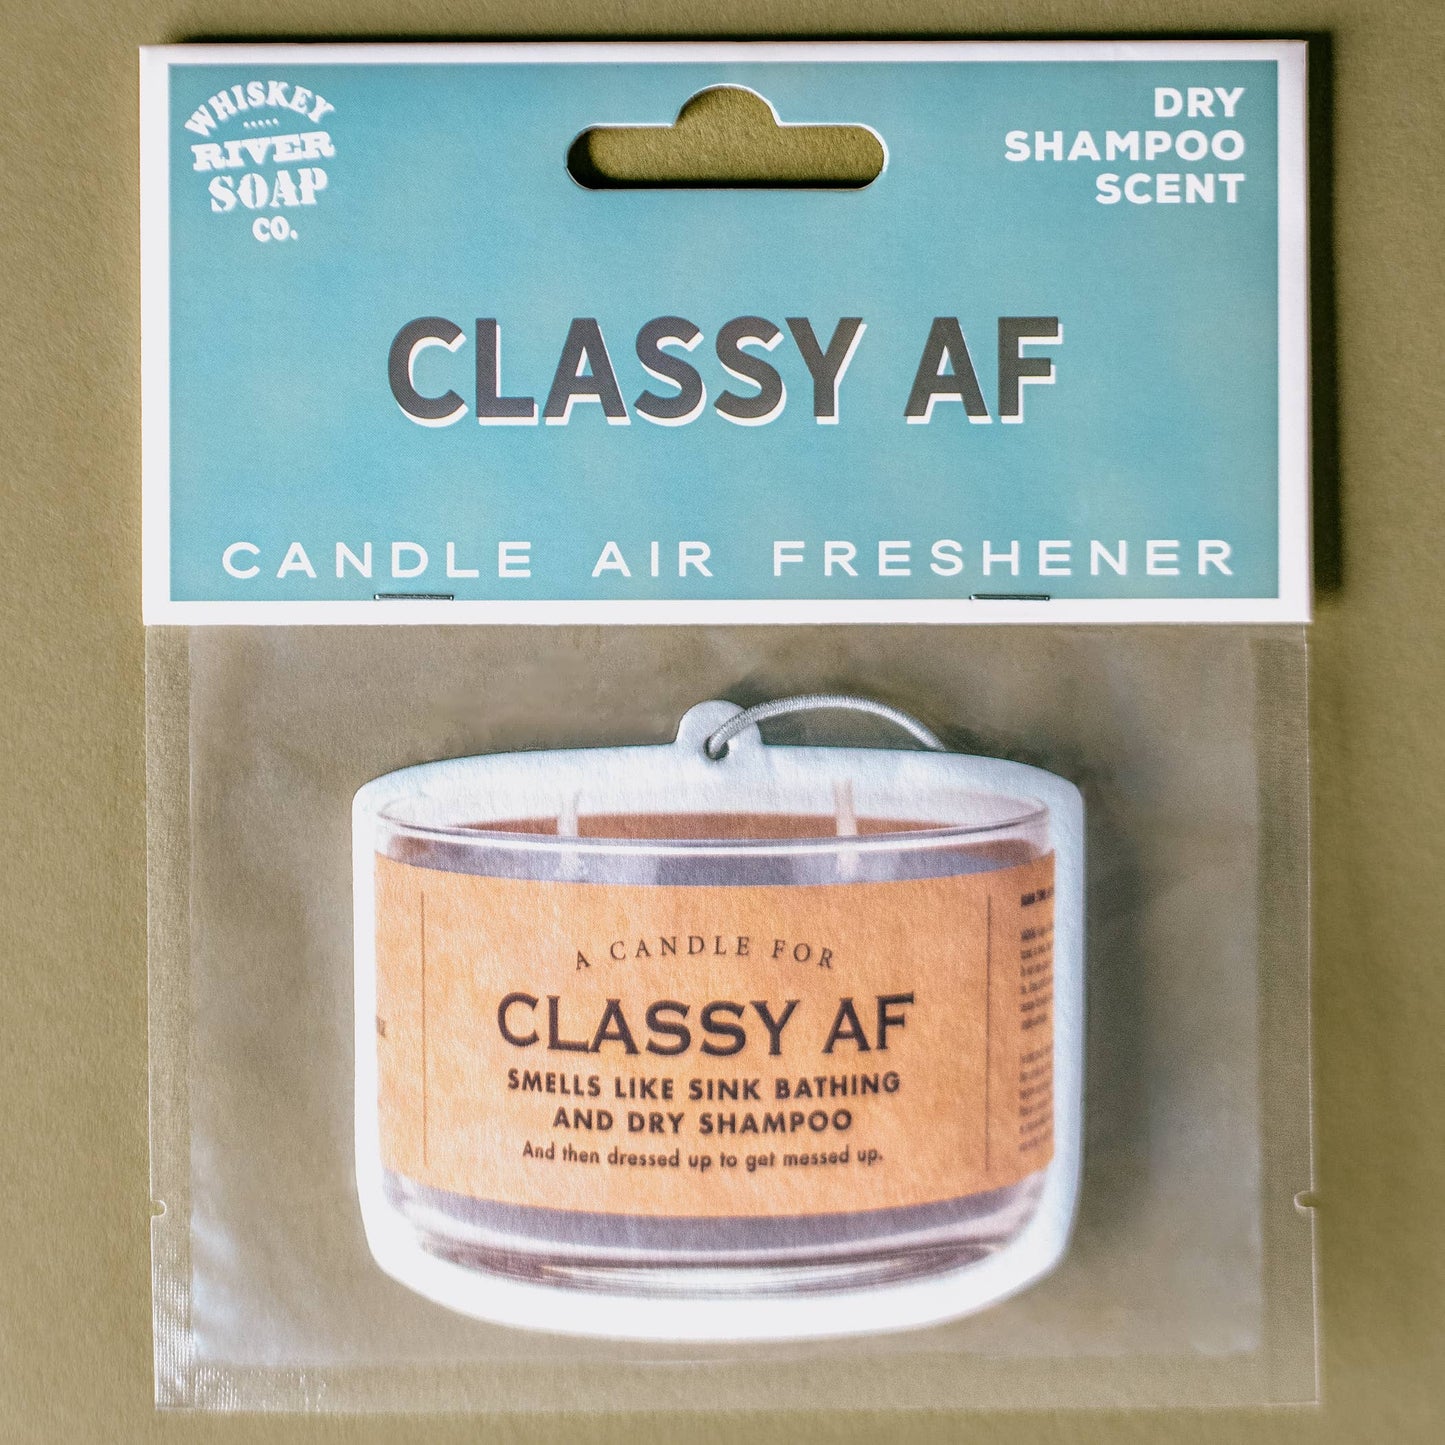 Whiskey River Soap Company Classy AF Air Freshener